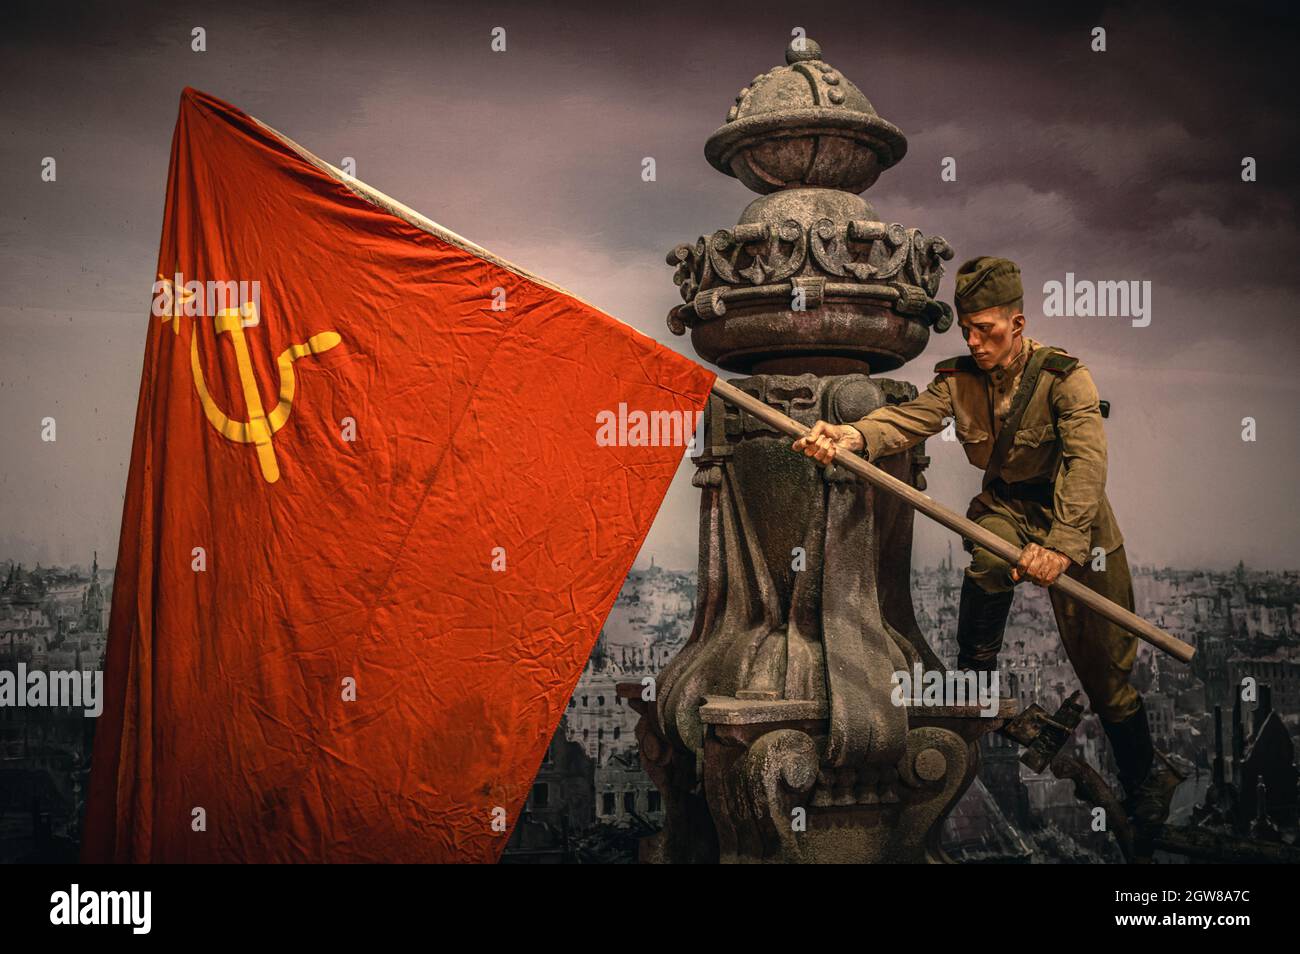 Young Soviet soldier waving a flag in captured Berlin. WWII historical diorama titled 'Memory Speaks. A Way through the War'. Saint Petersburg. Stock Photo